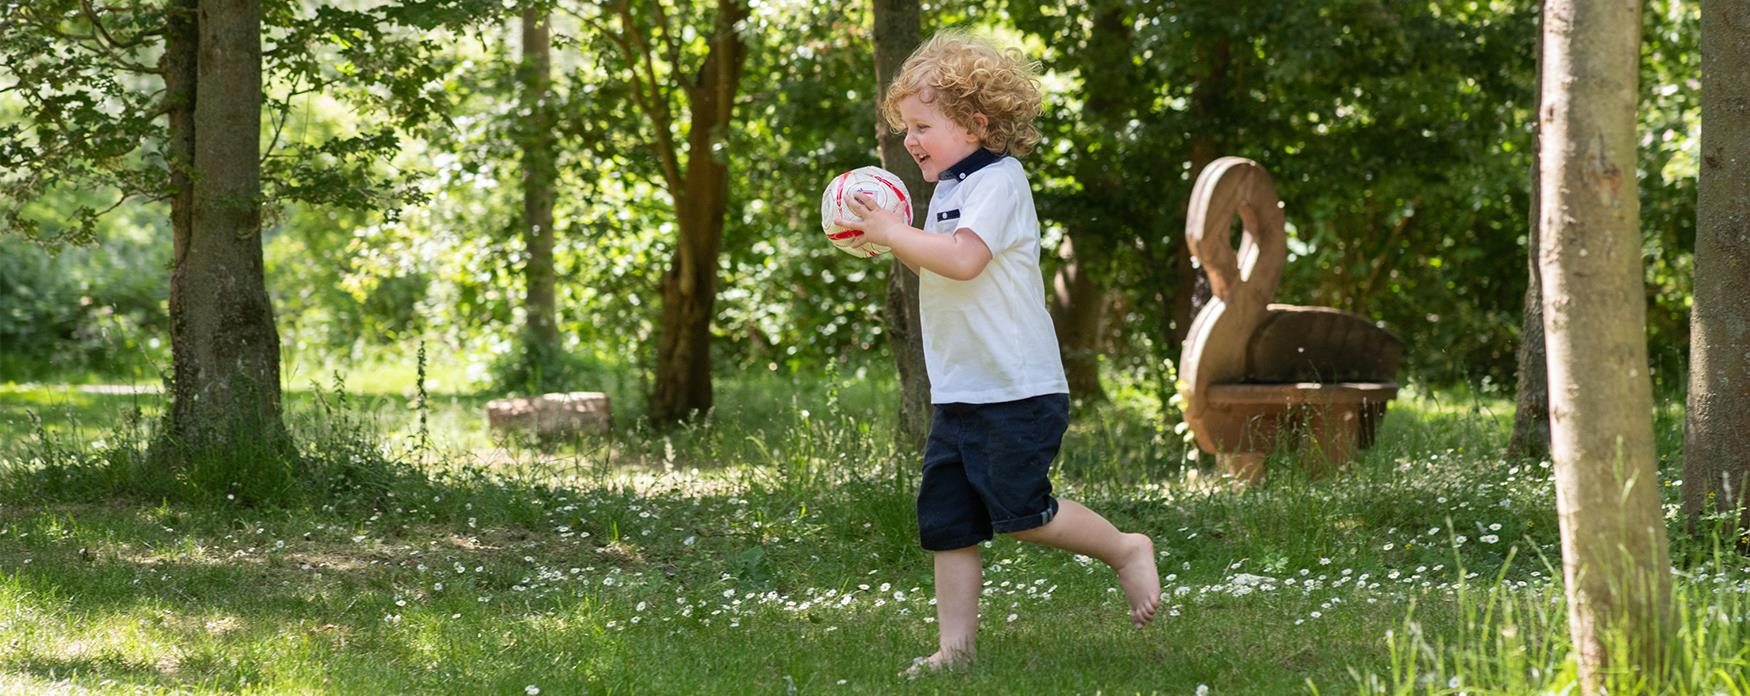 Child running with a ball in a park